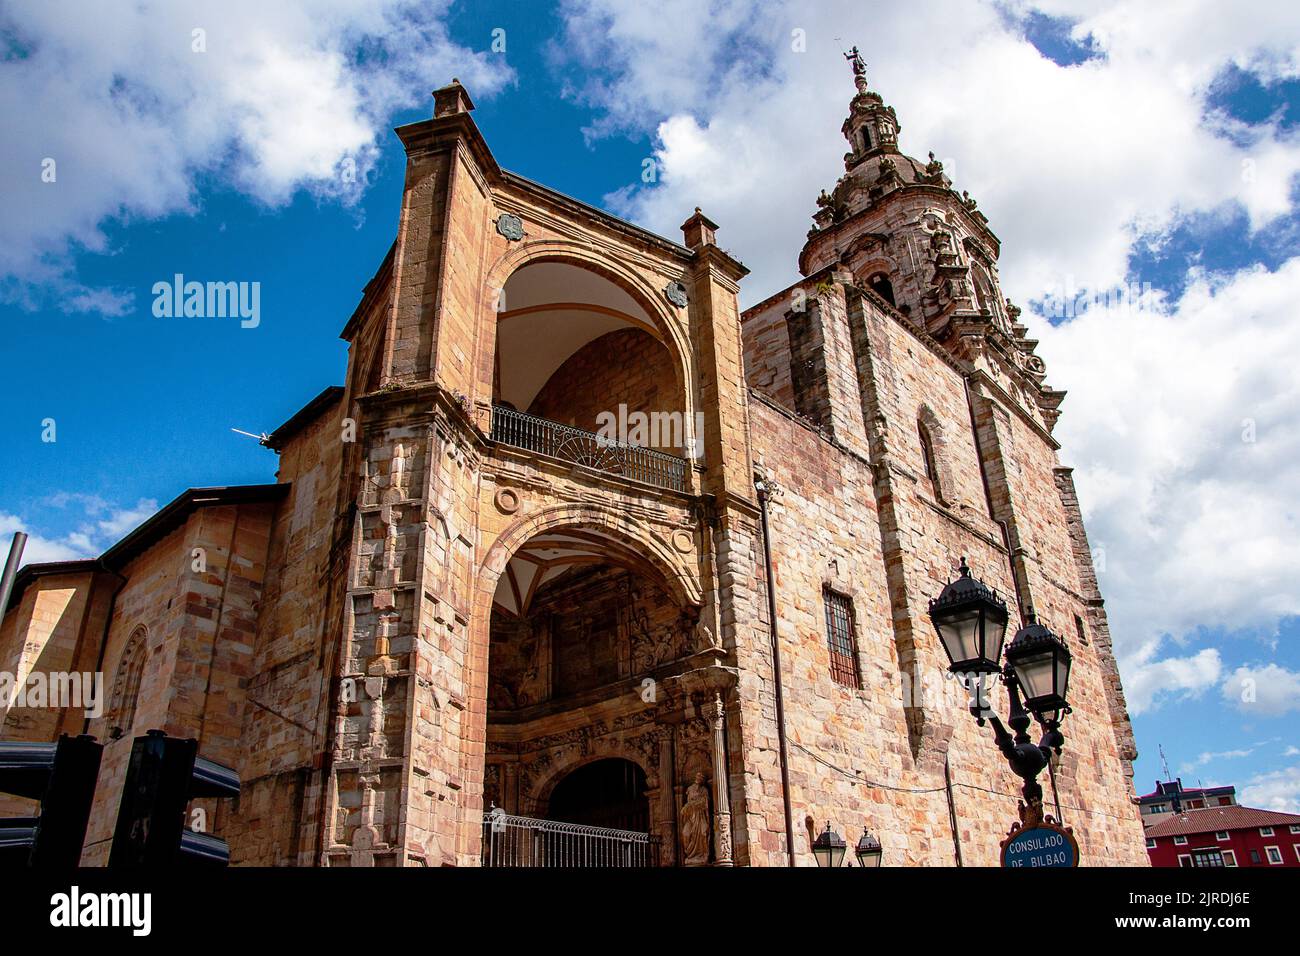 Facade of old cathedral in Bilbao. Spain Stock Photo